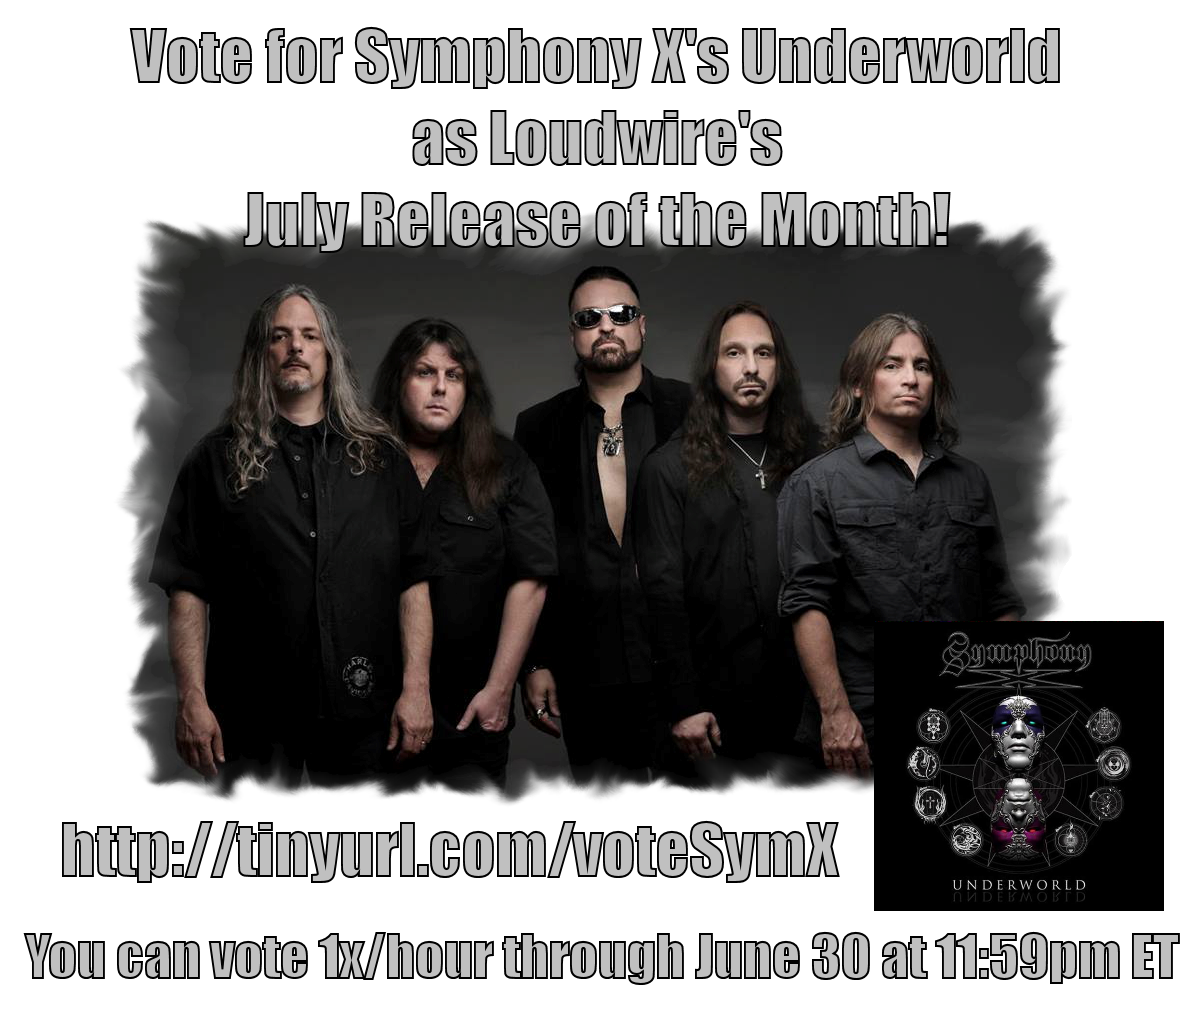 Vote for Underworld as Loudwire’s New Release of the Month!! Symphony X